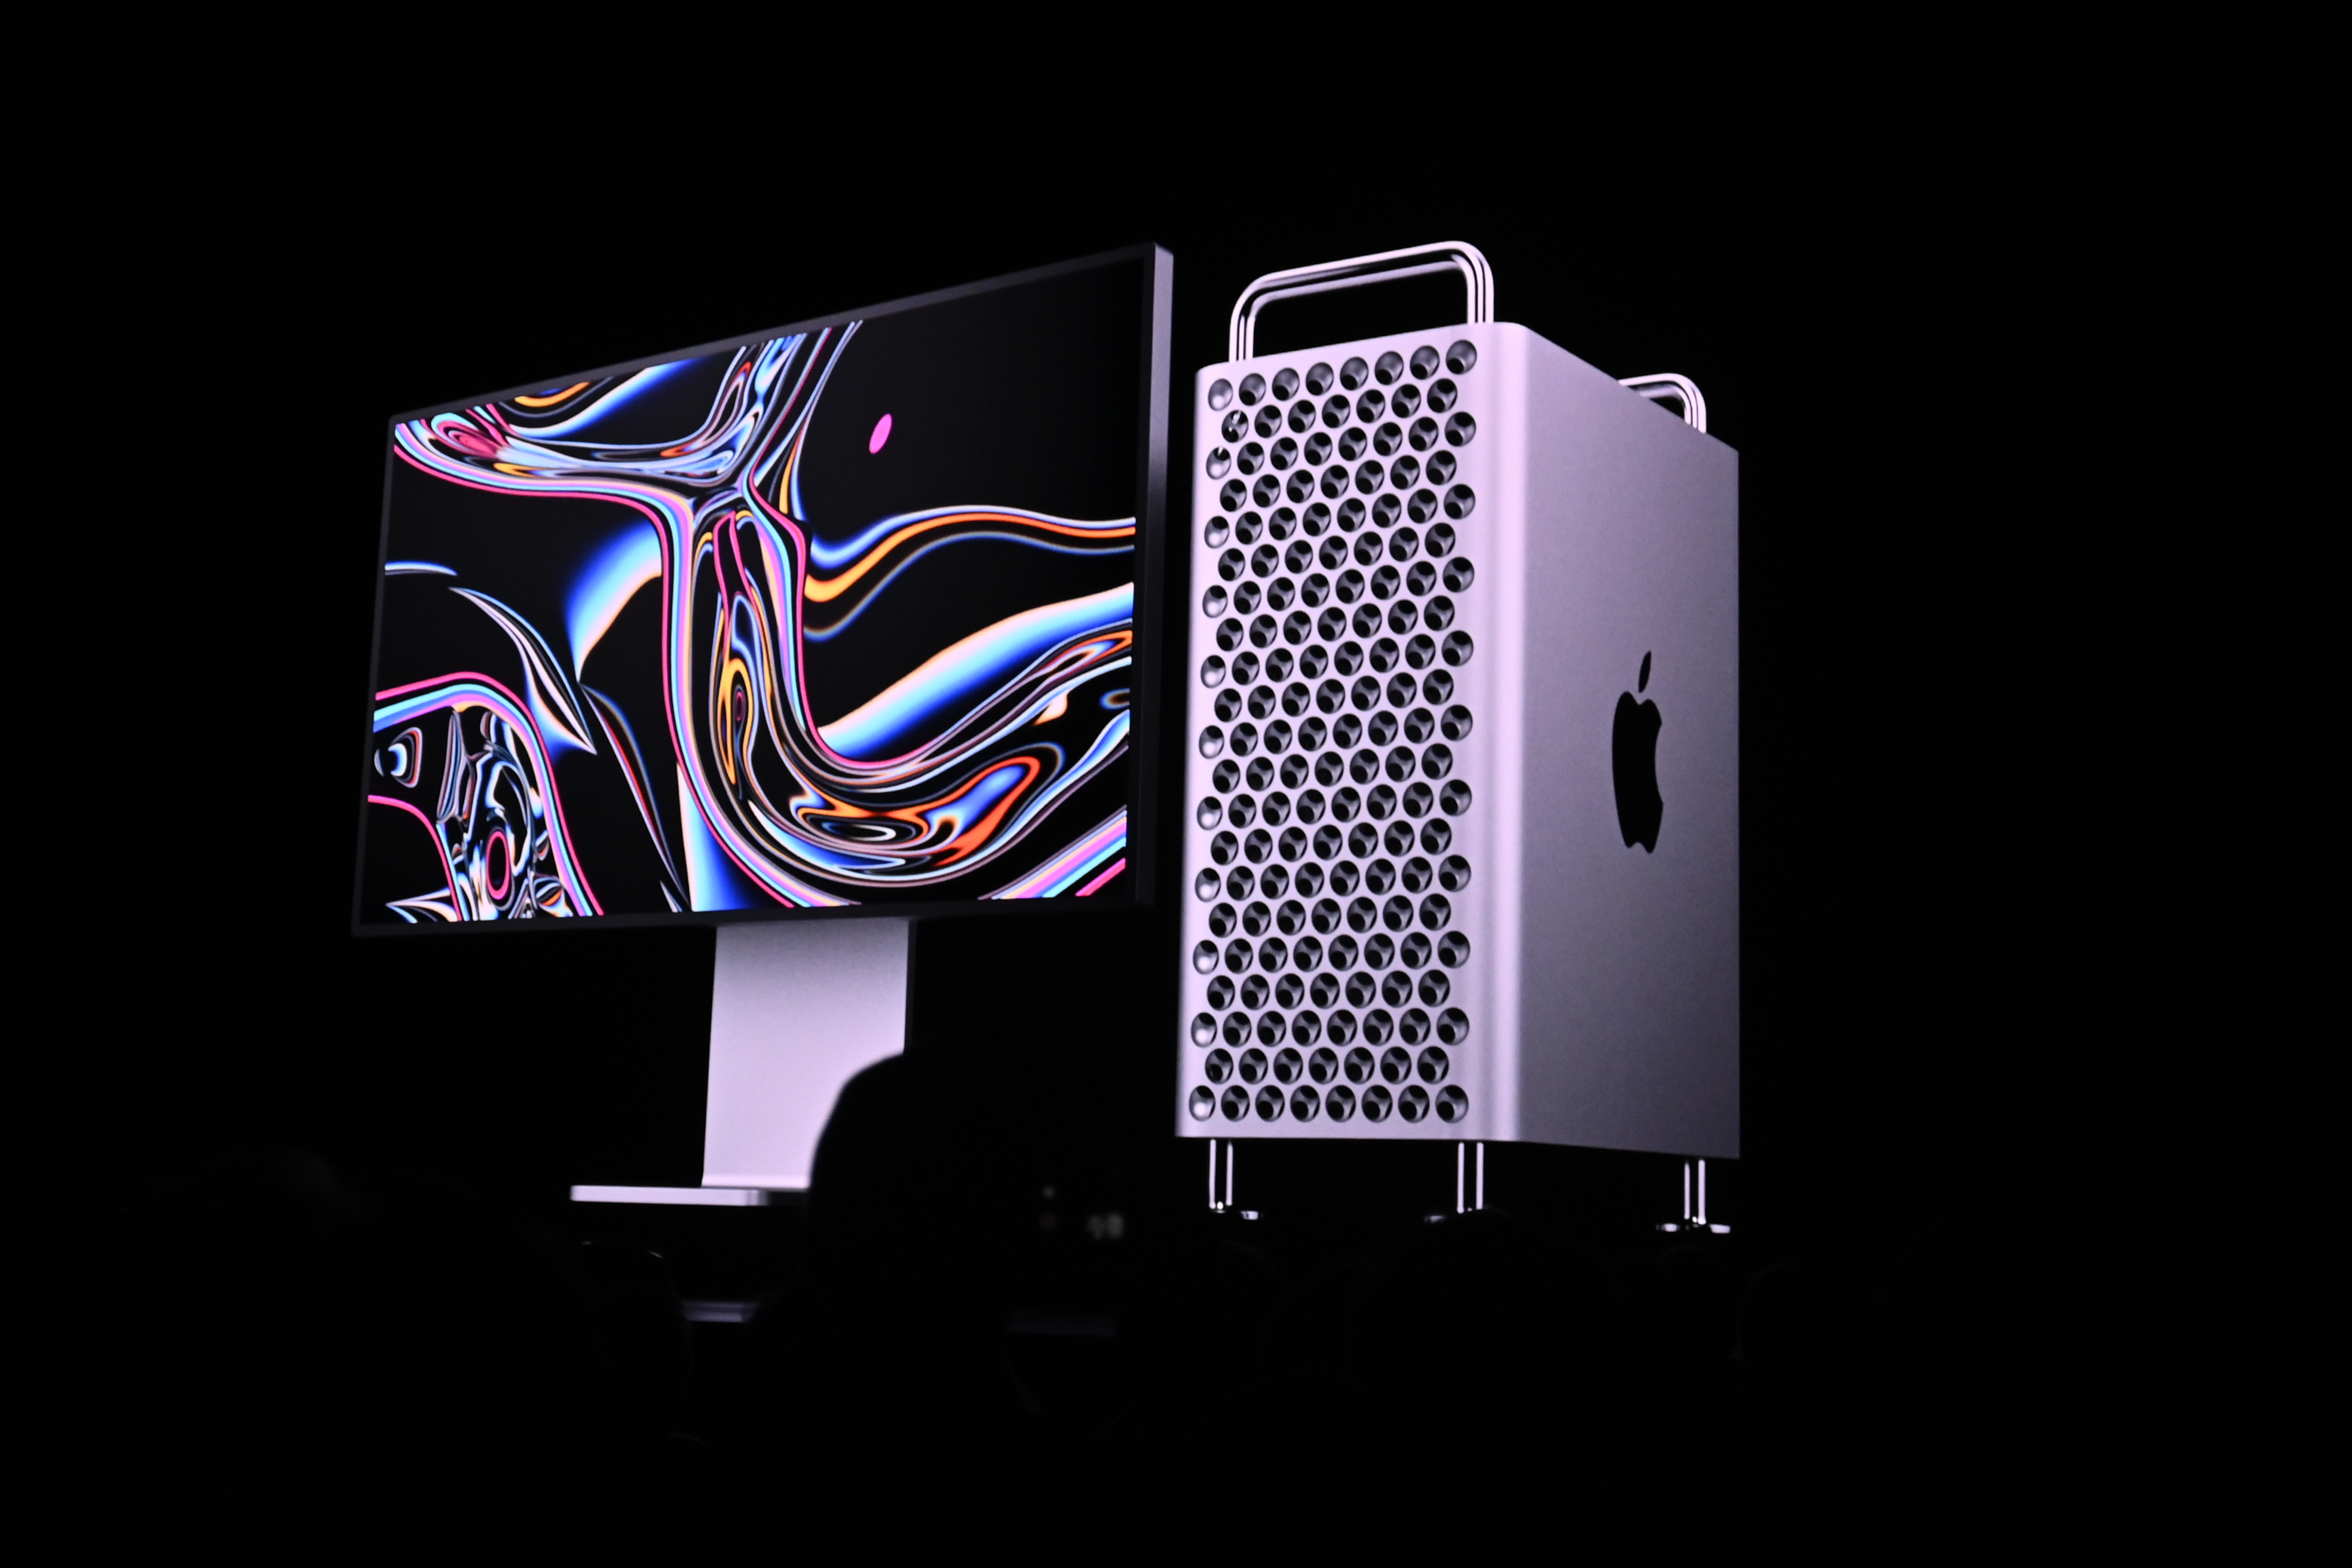 Screen at WWDC 2019 showing Mac Pro with audience watching.